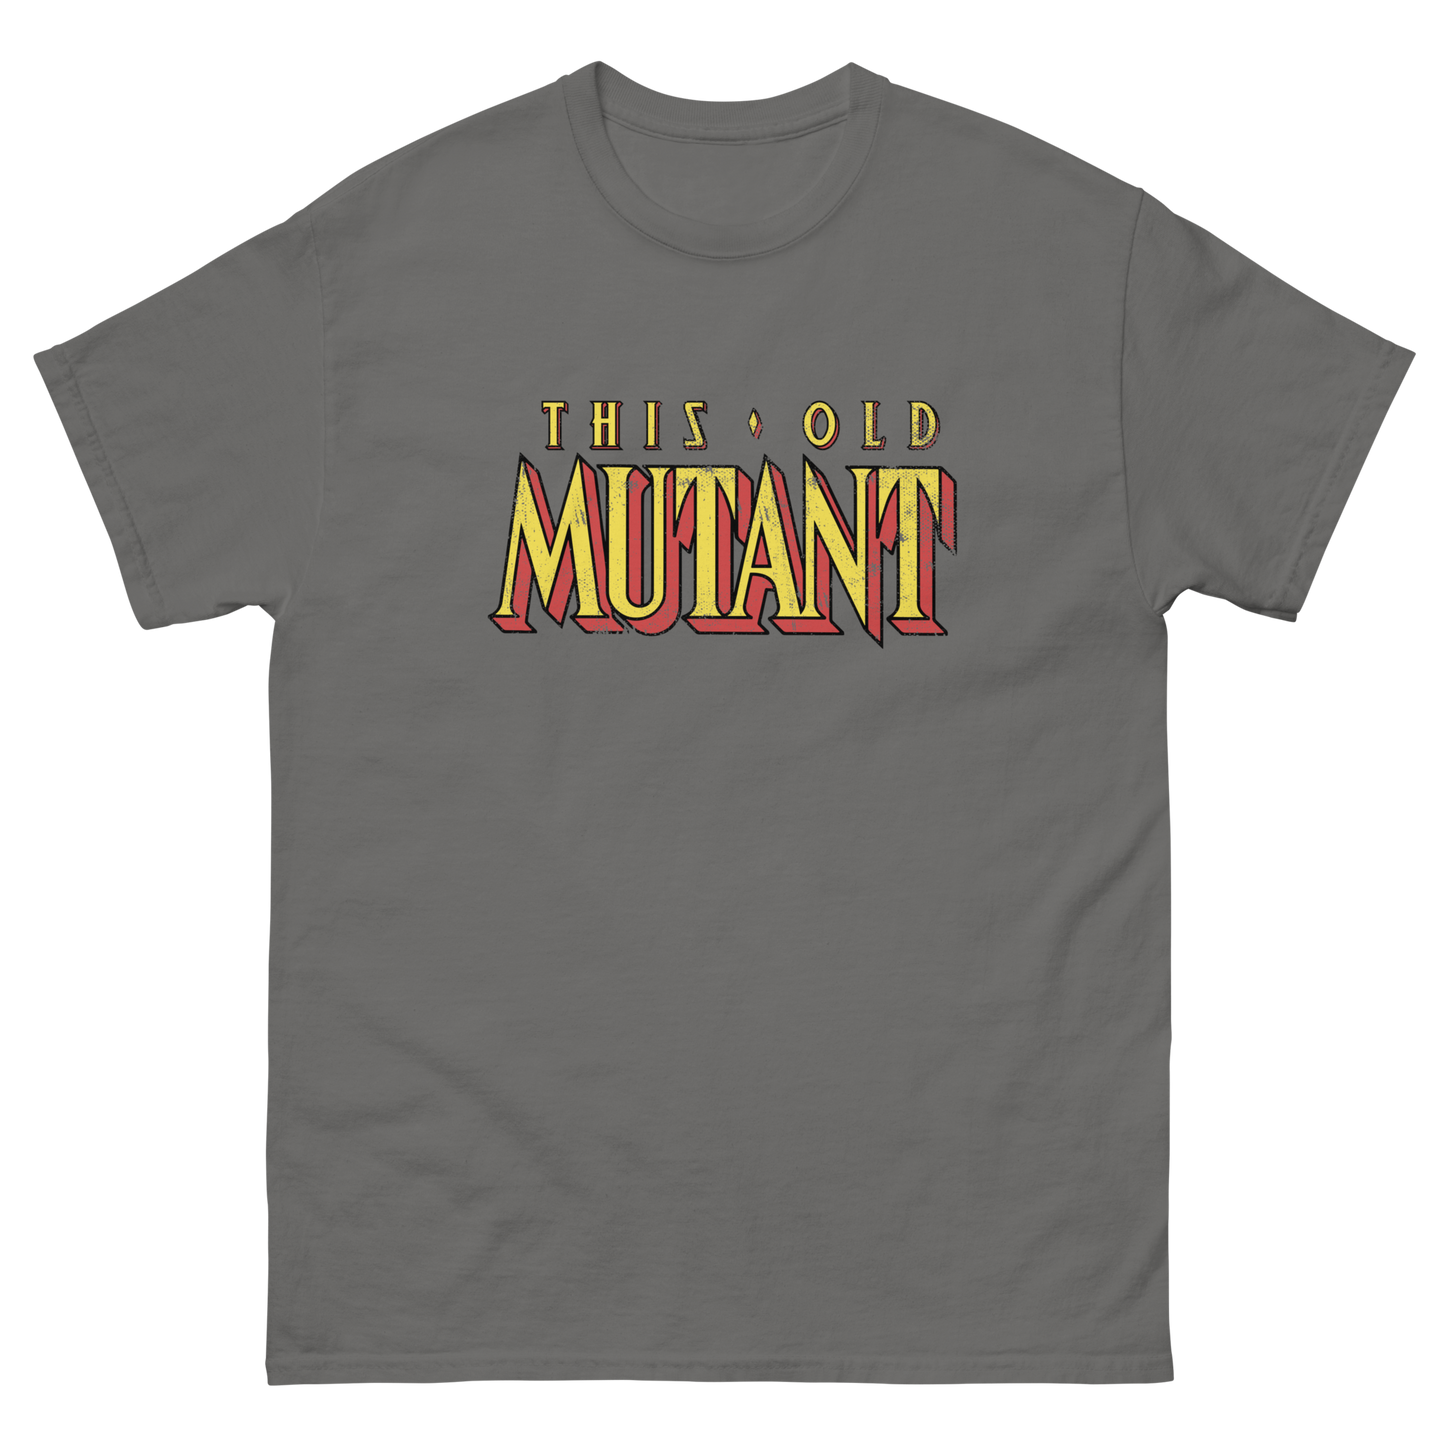 This Old Mutant t-shirt